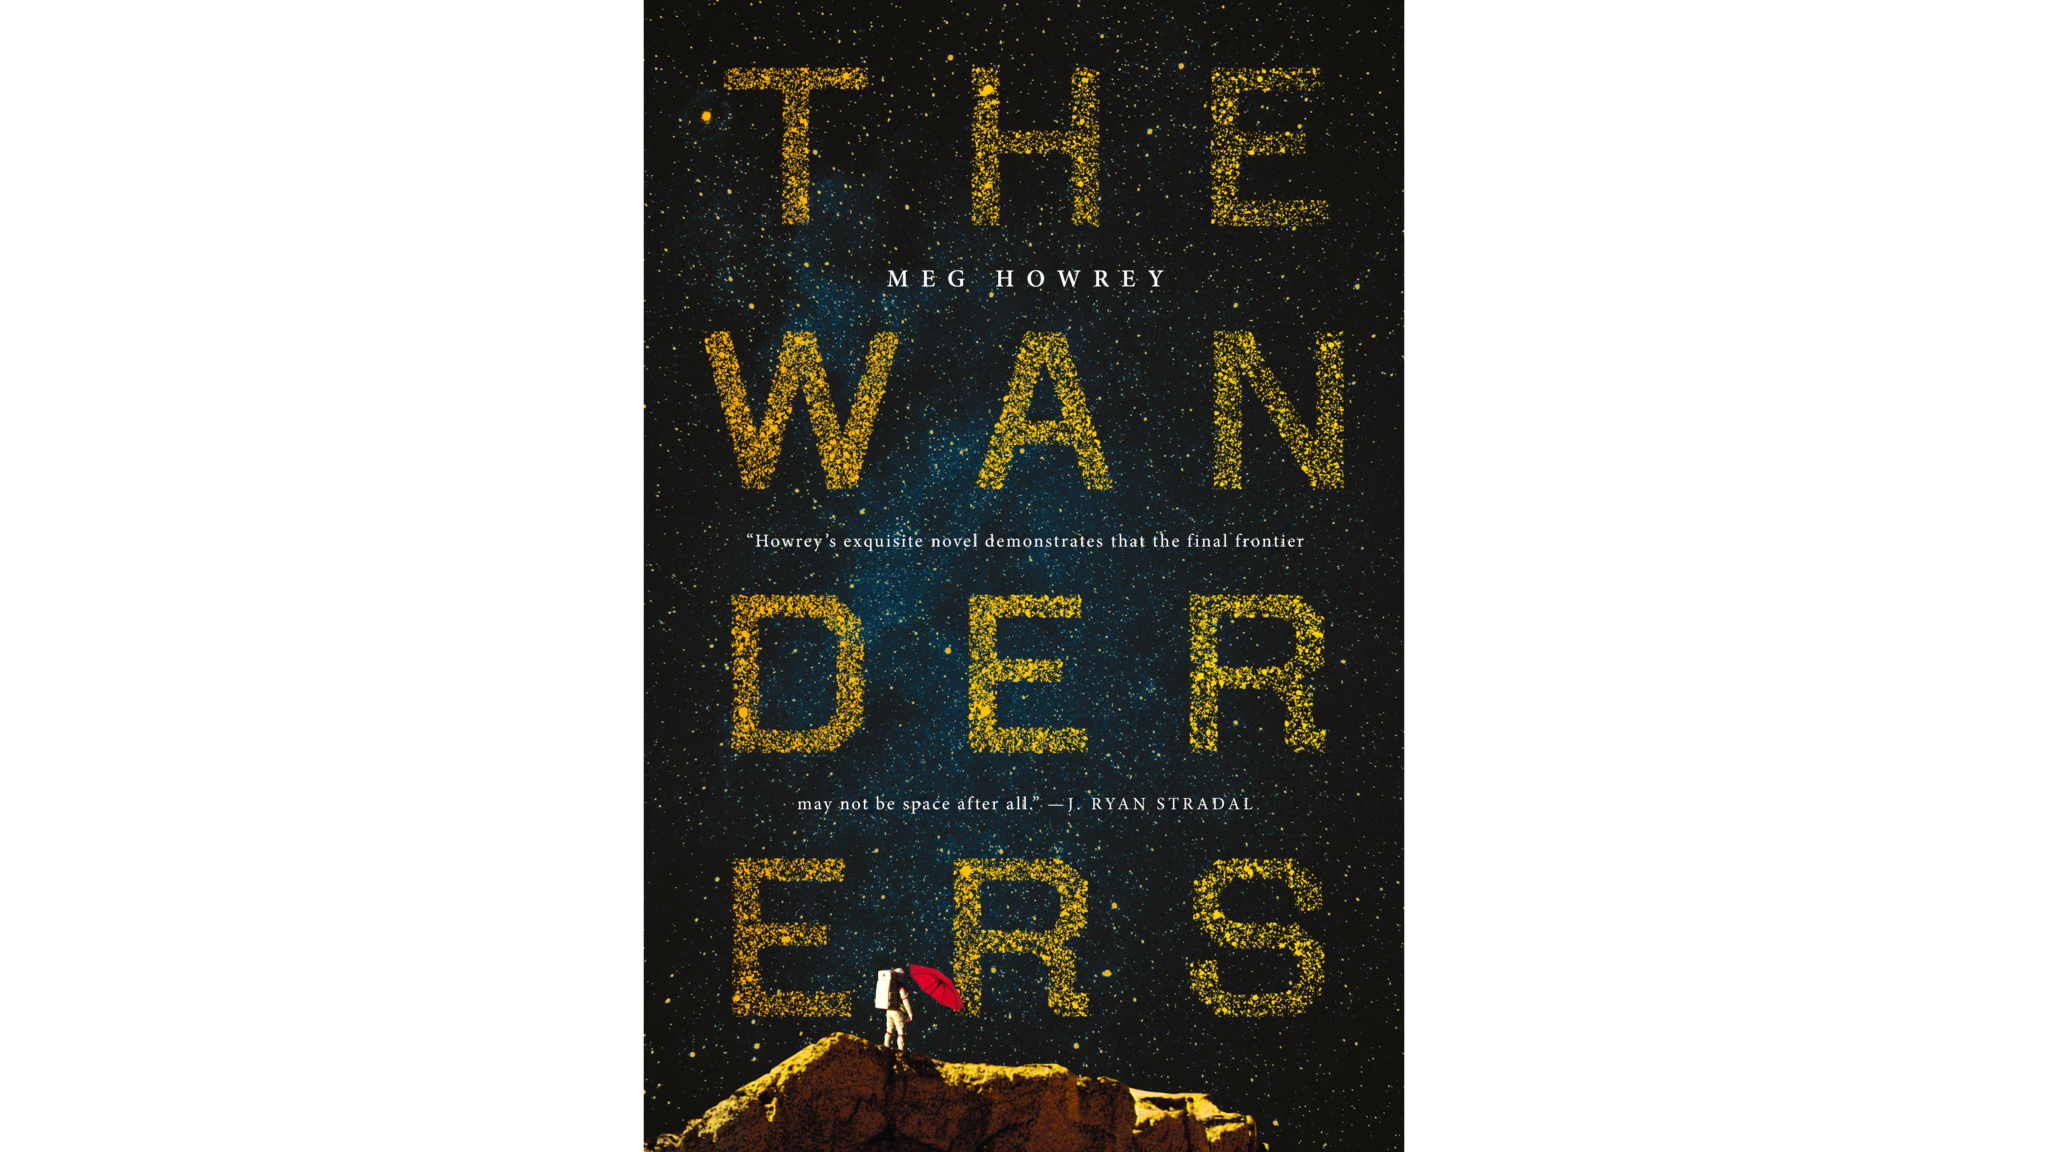 "The Wanderers" by Meg Howery